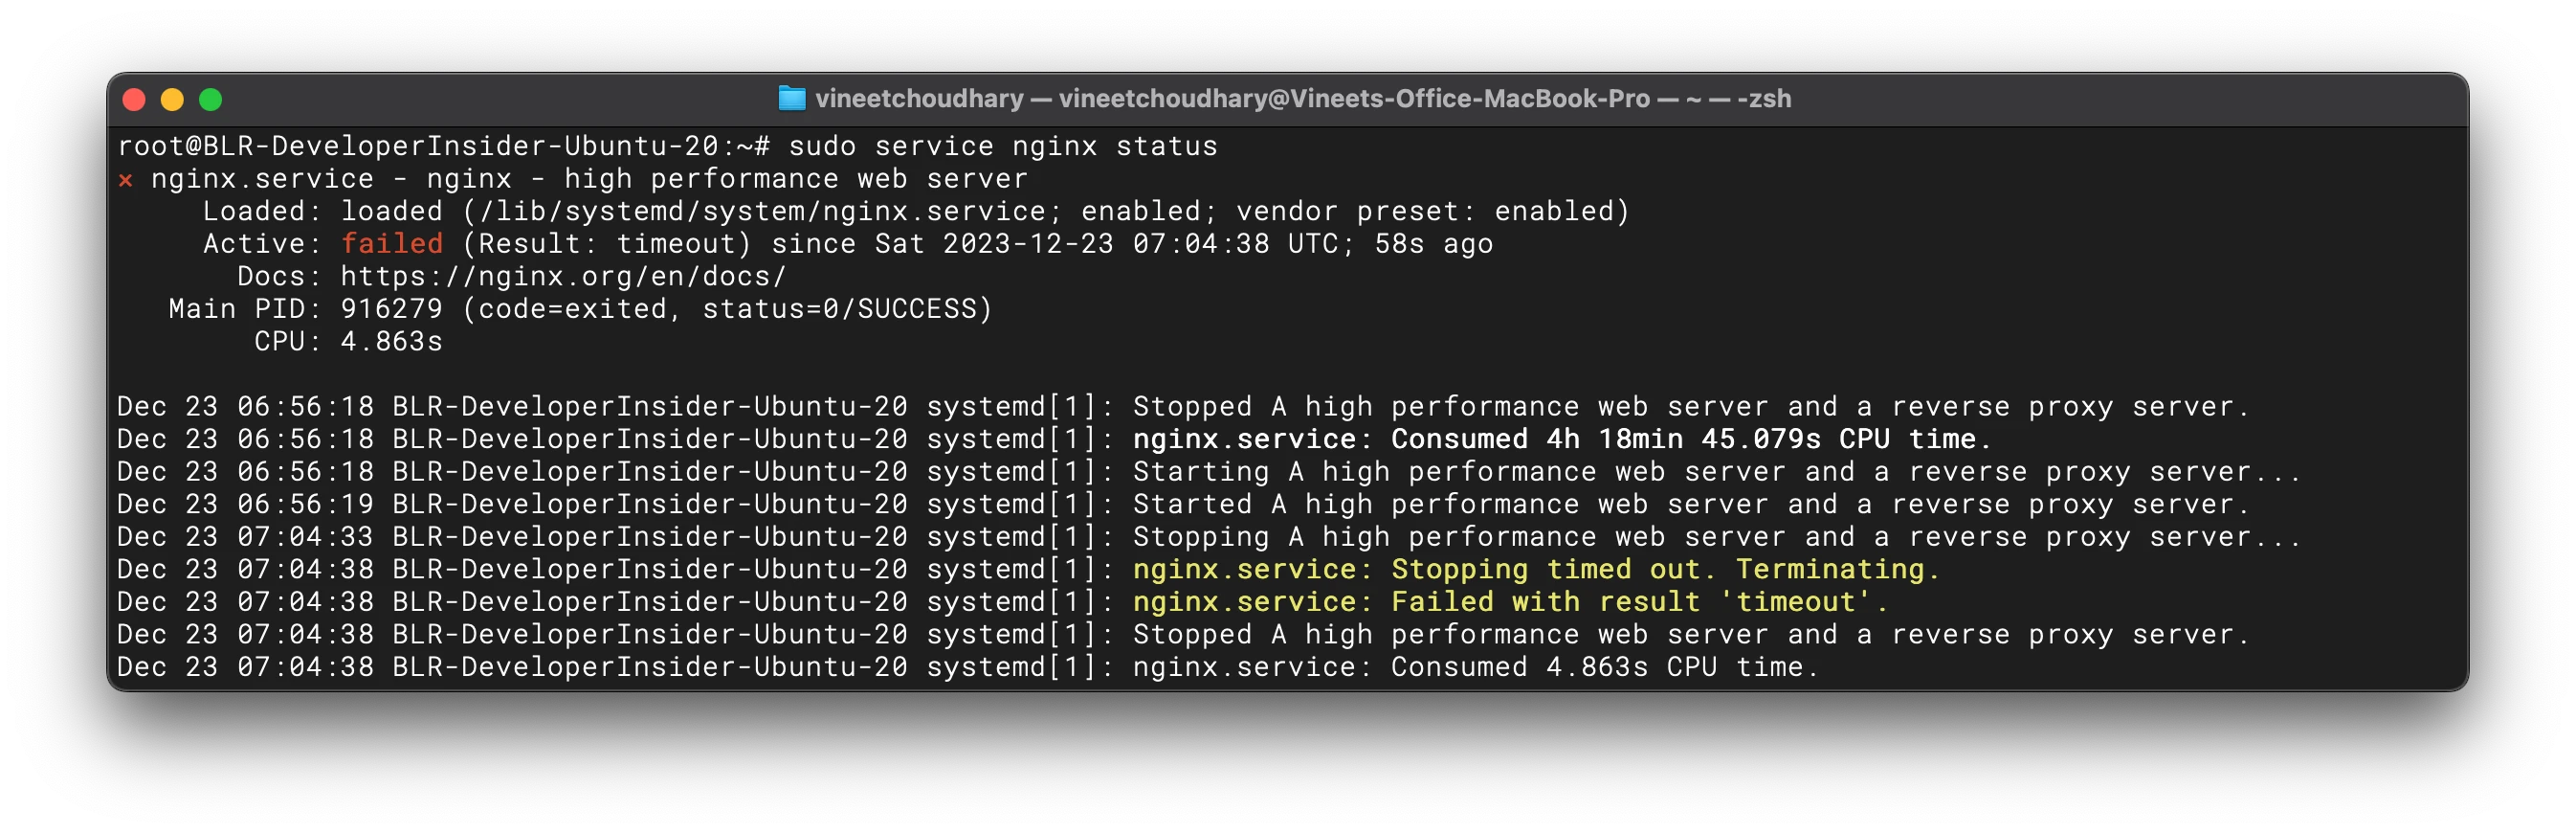 Install/Update Nginx to the latest stable version on Ubuntu